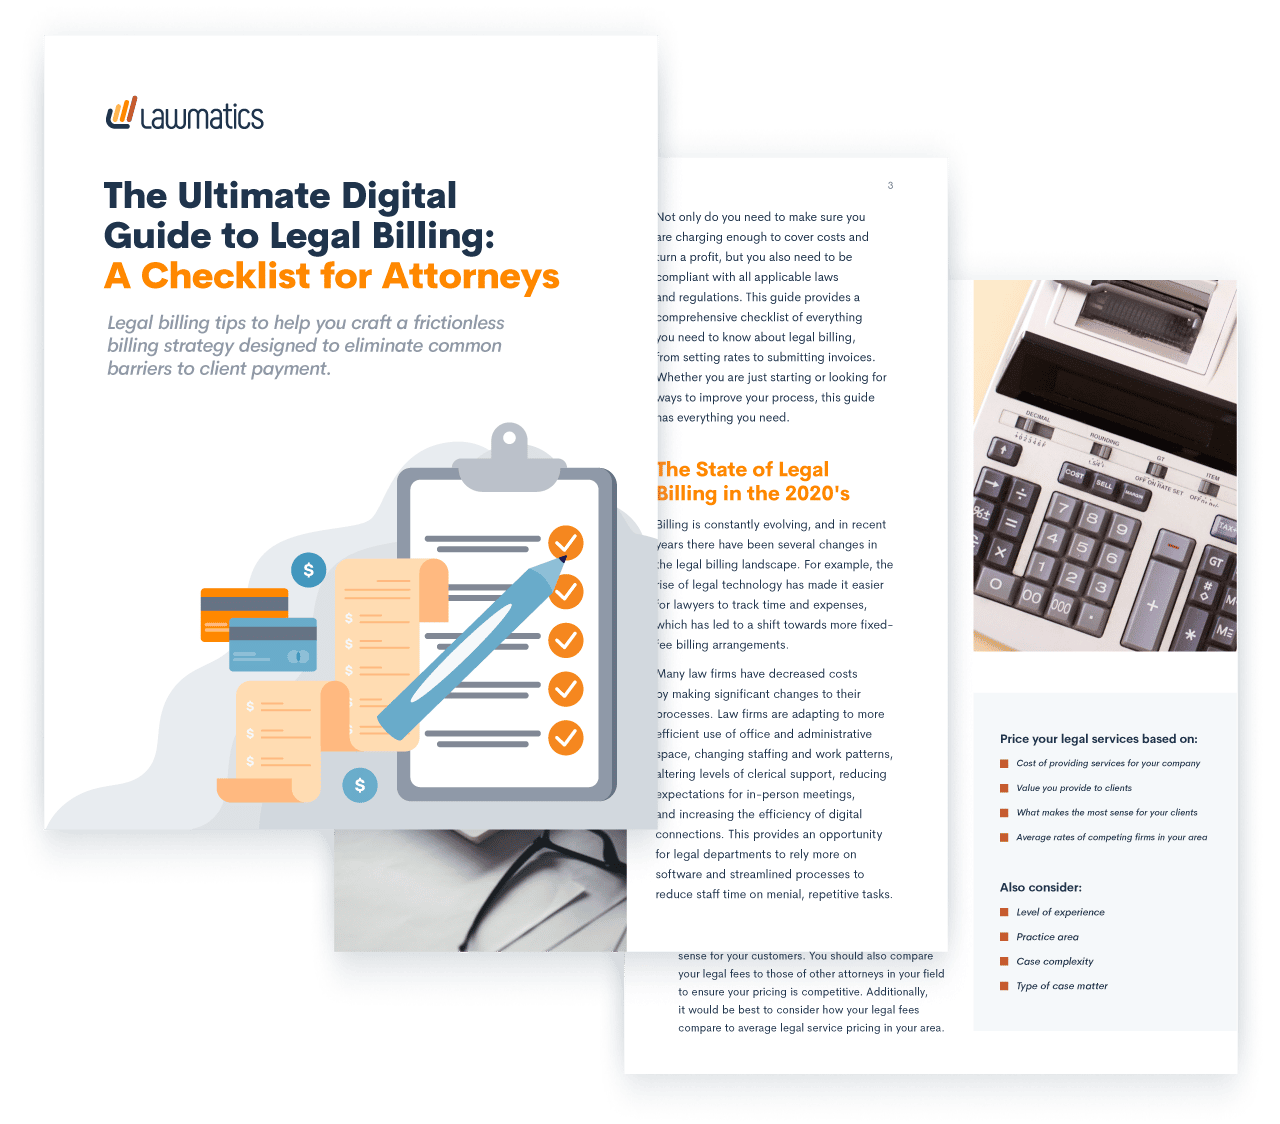 The Ultimate Digital Guide to Legal Billing